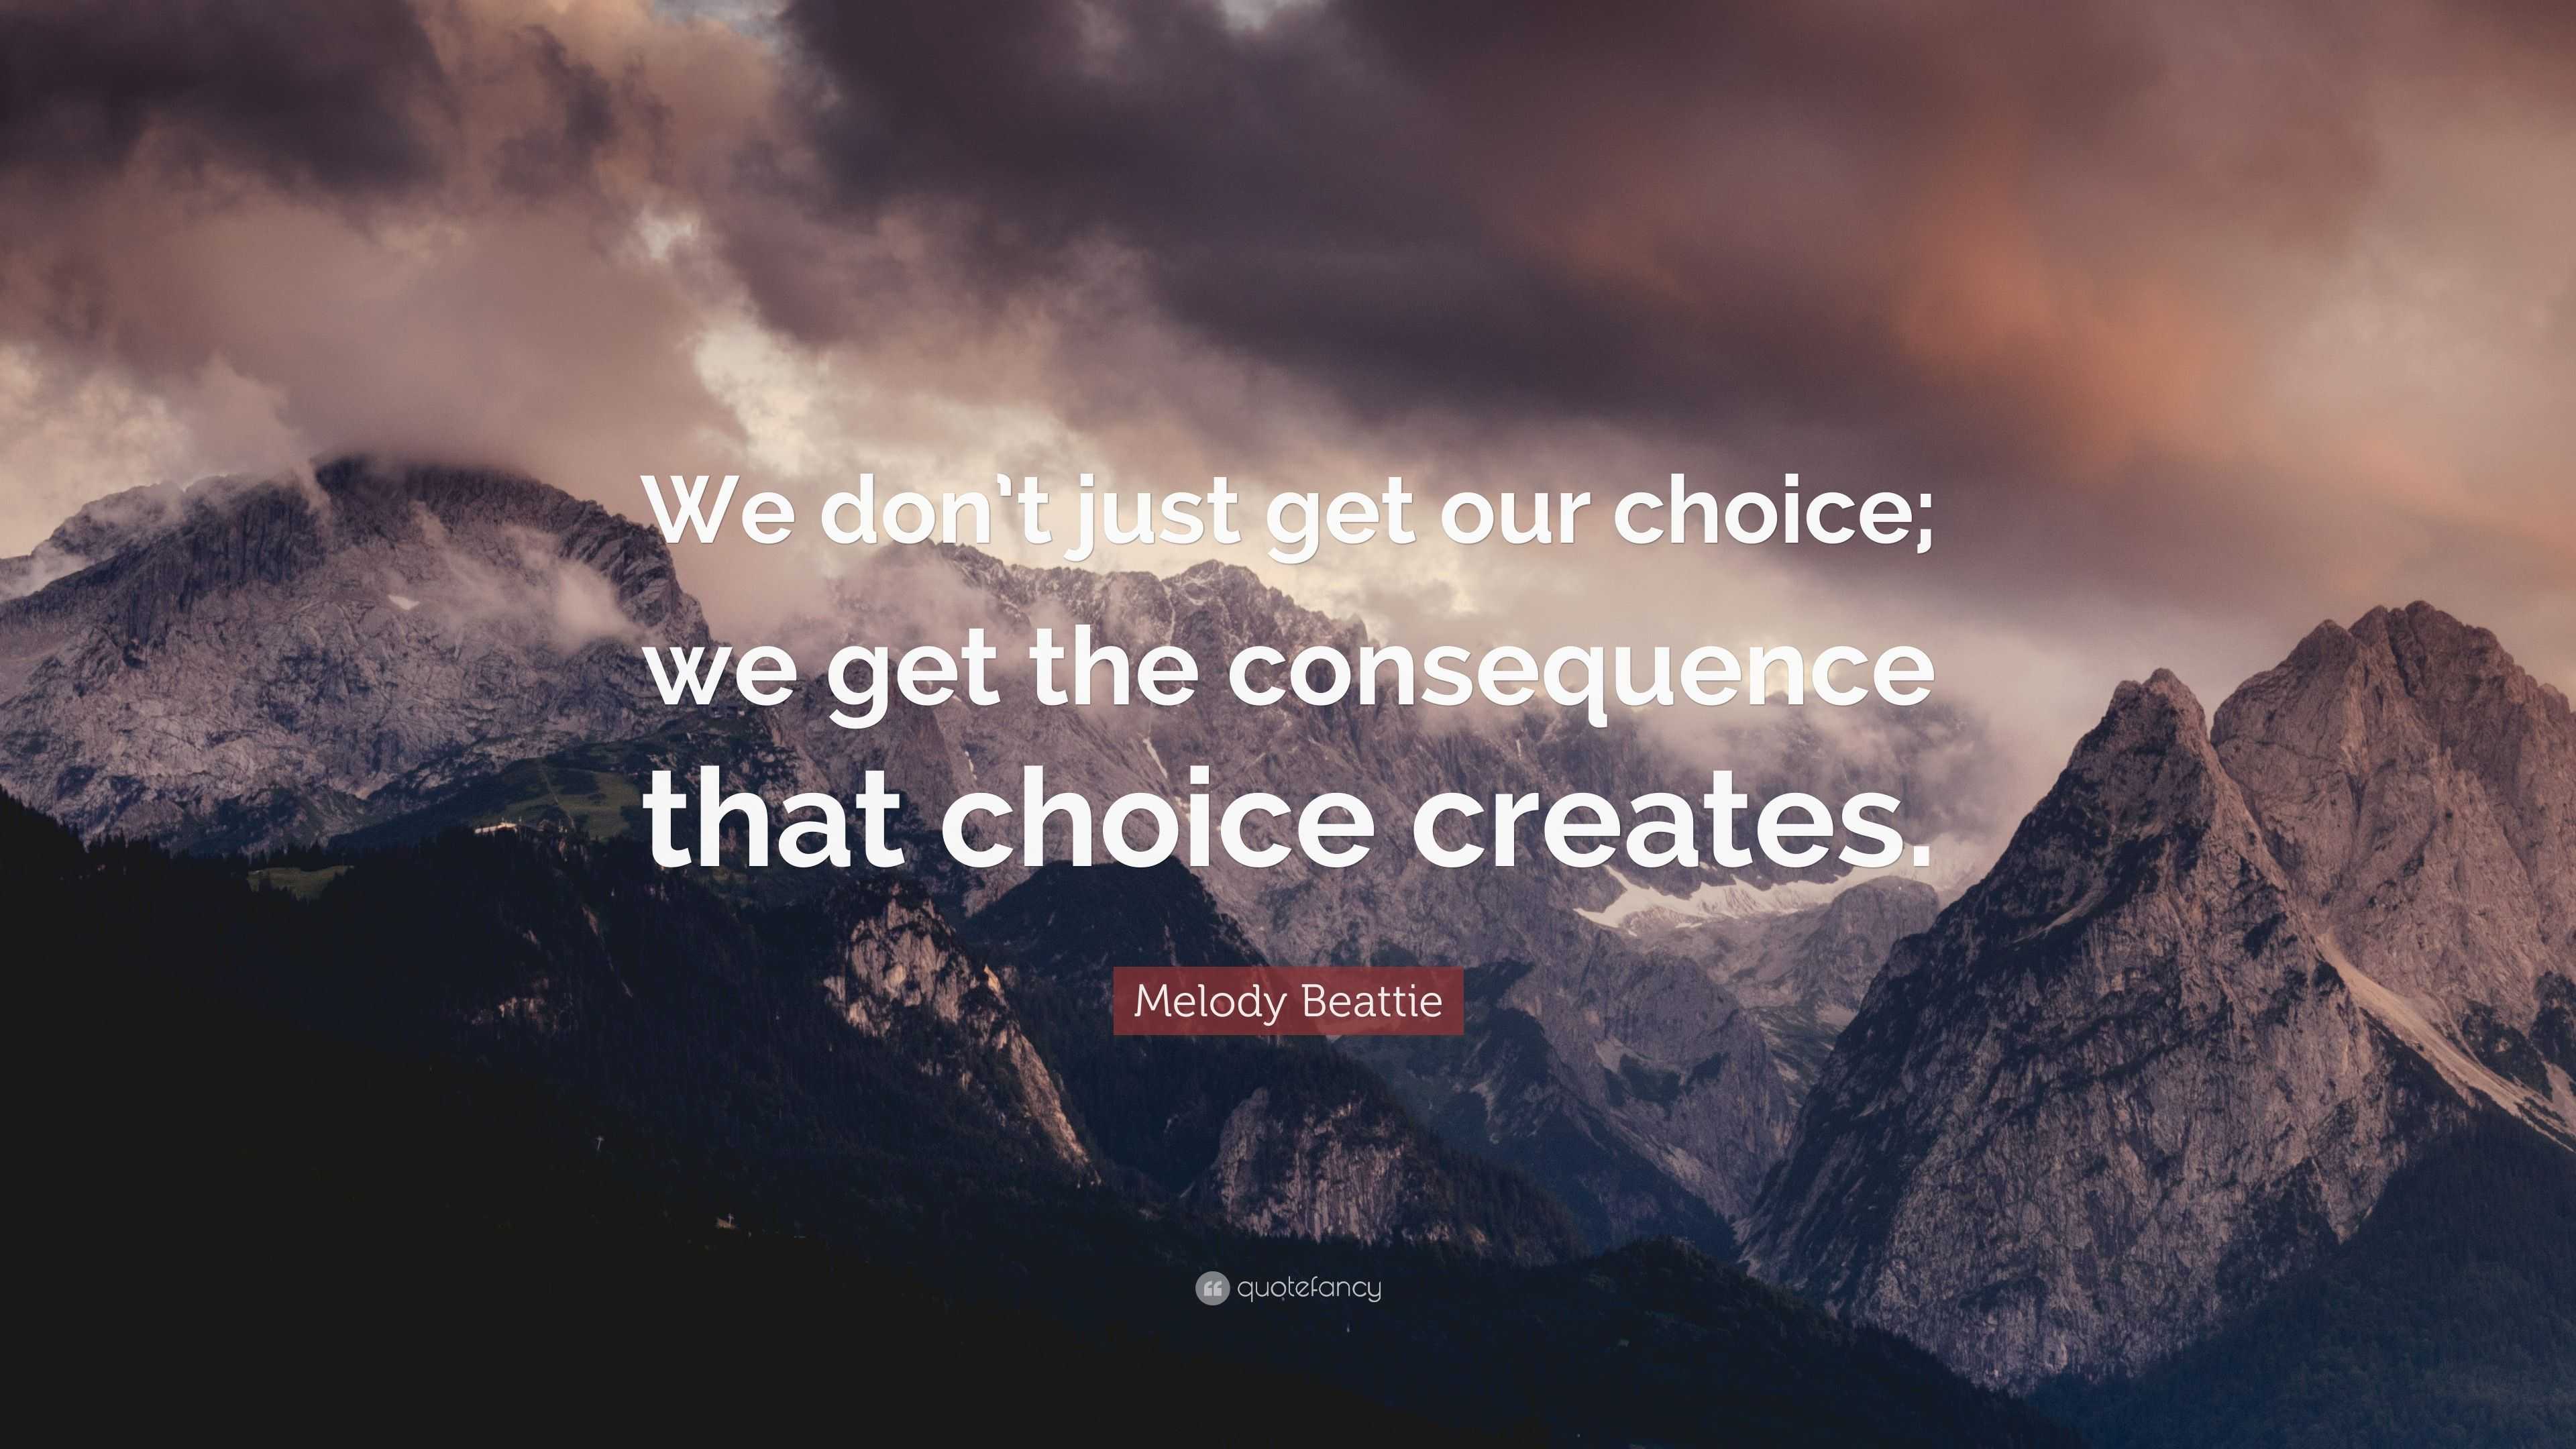 Melody Beattie Quote: “We don’t just get our choice; we get the ...